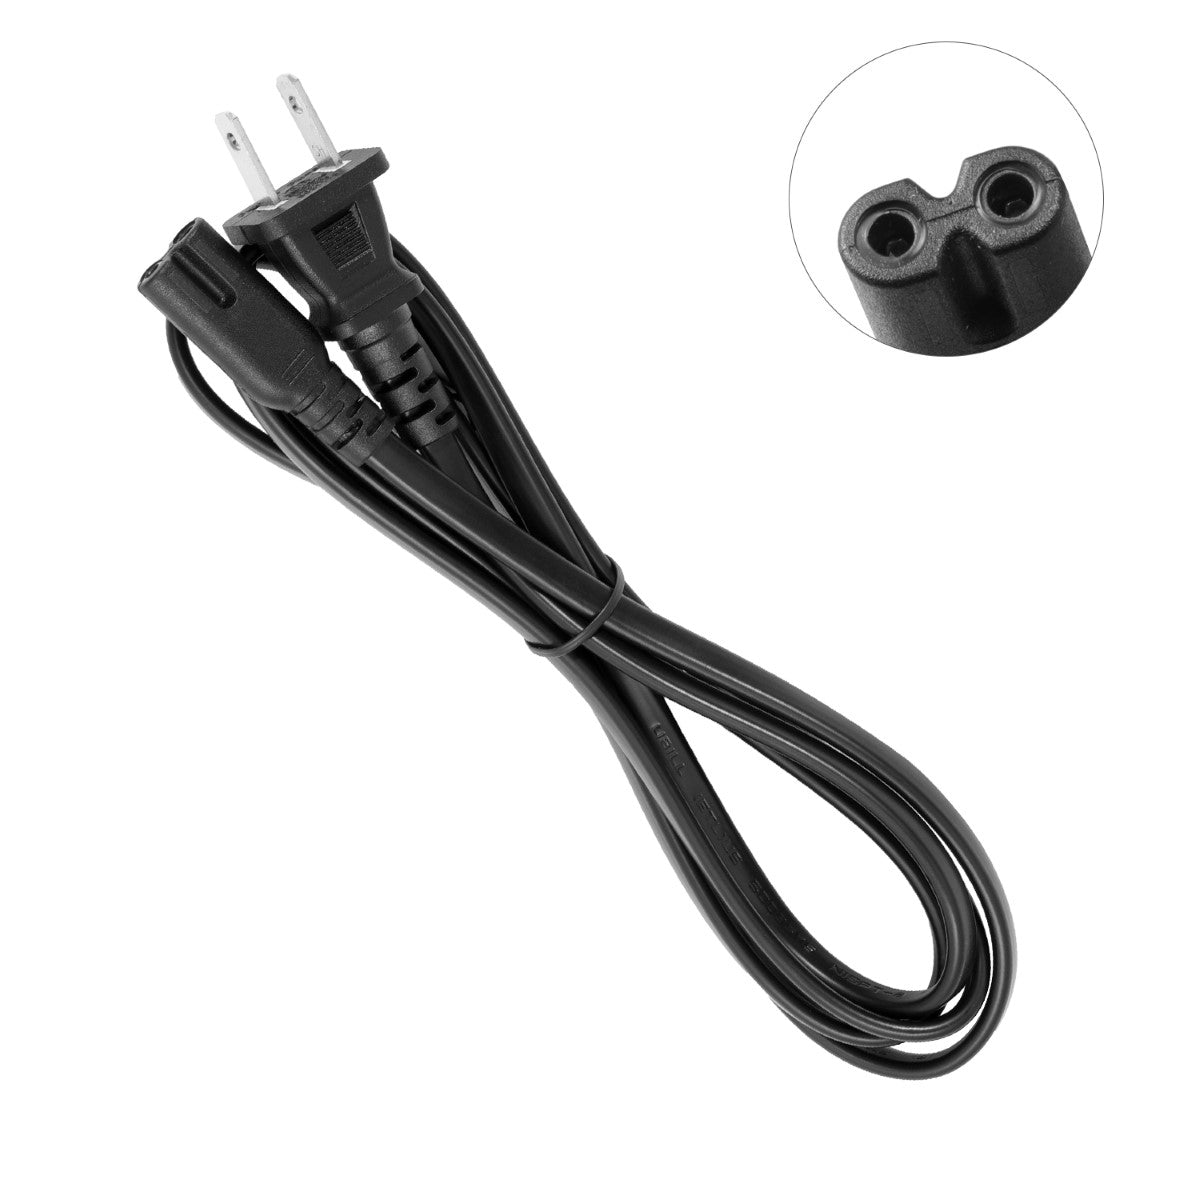 Power Cord for HP Officejet Pro X451 Printer.